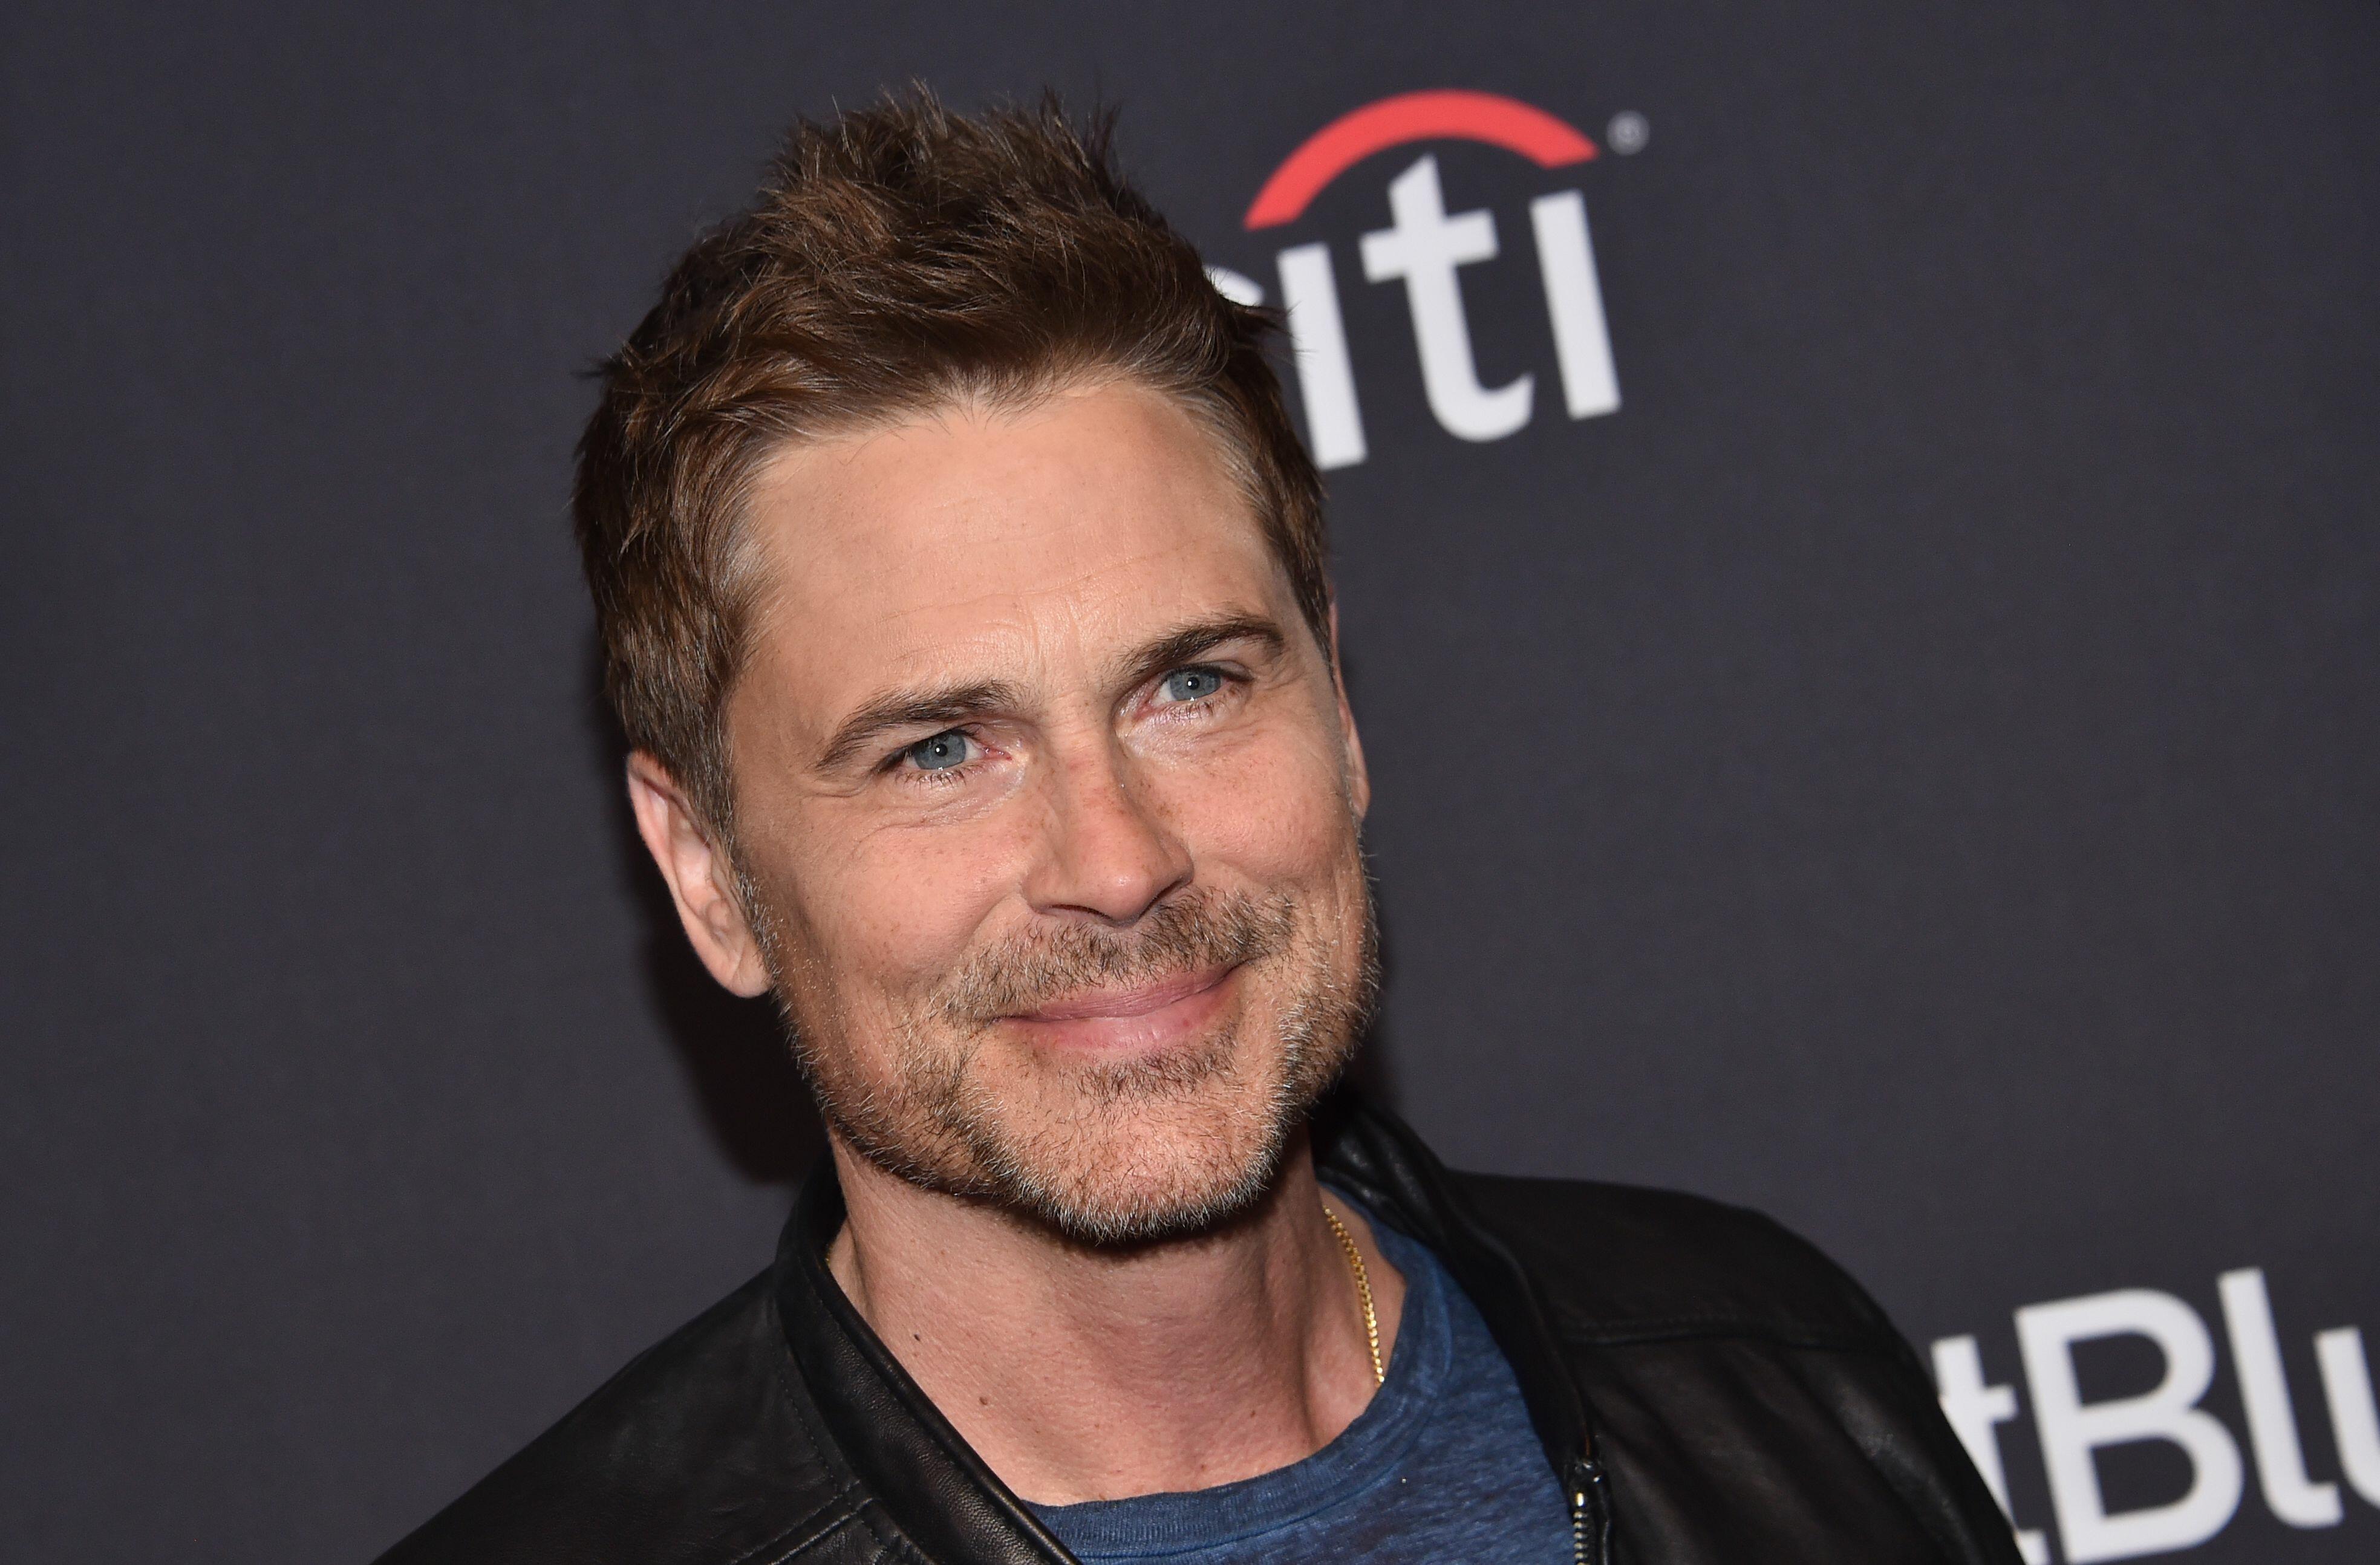 Rob Lowe Reveals He Turned Down The Role Of McDreamy On "Grey's A...